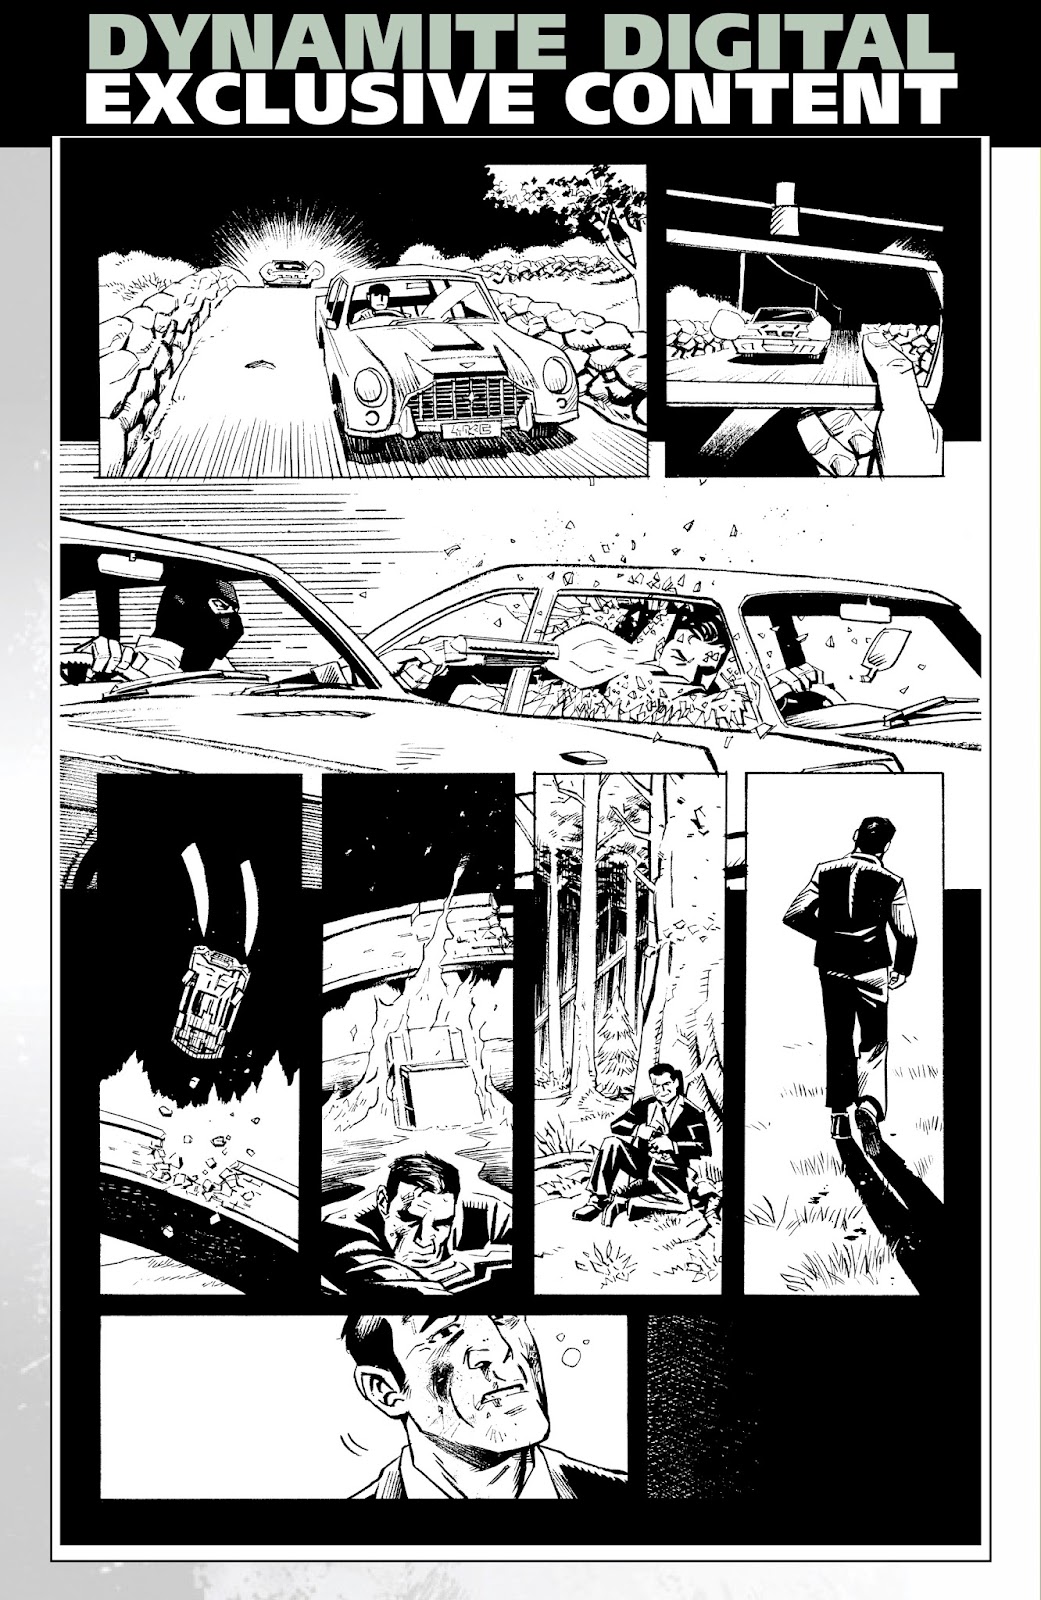 James Bond: The Body issue 4 - Page 26